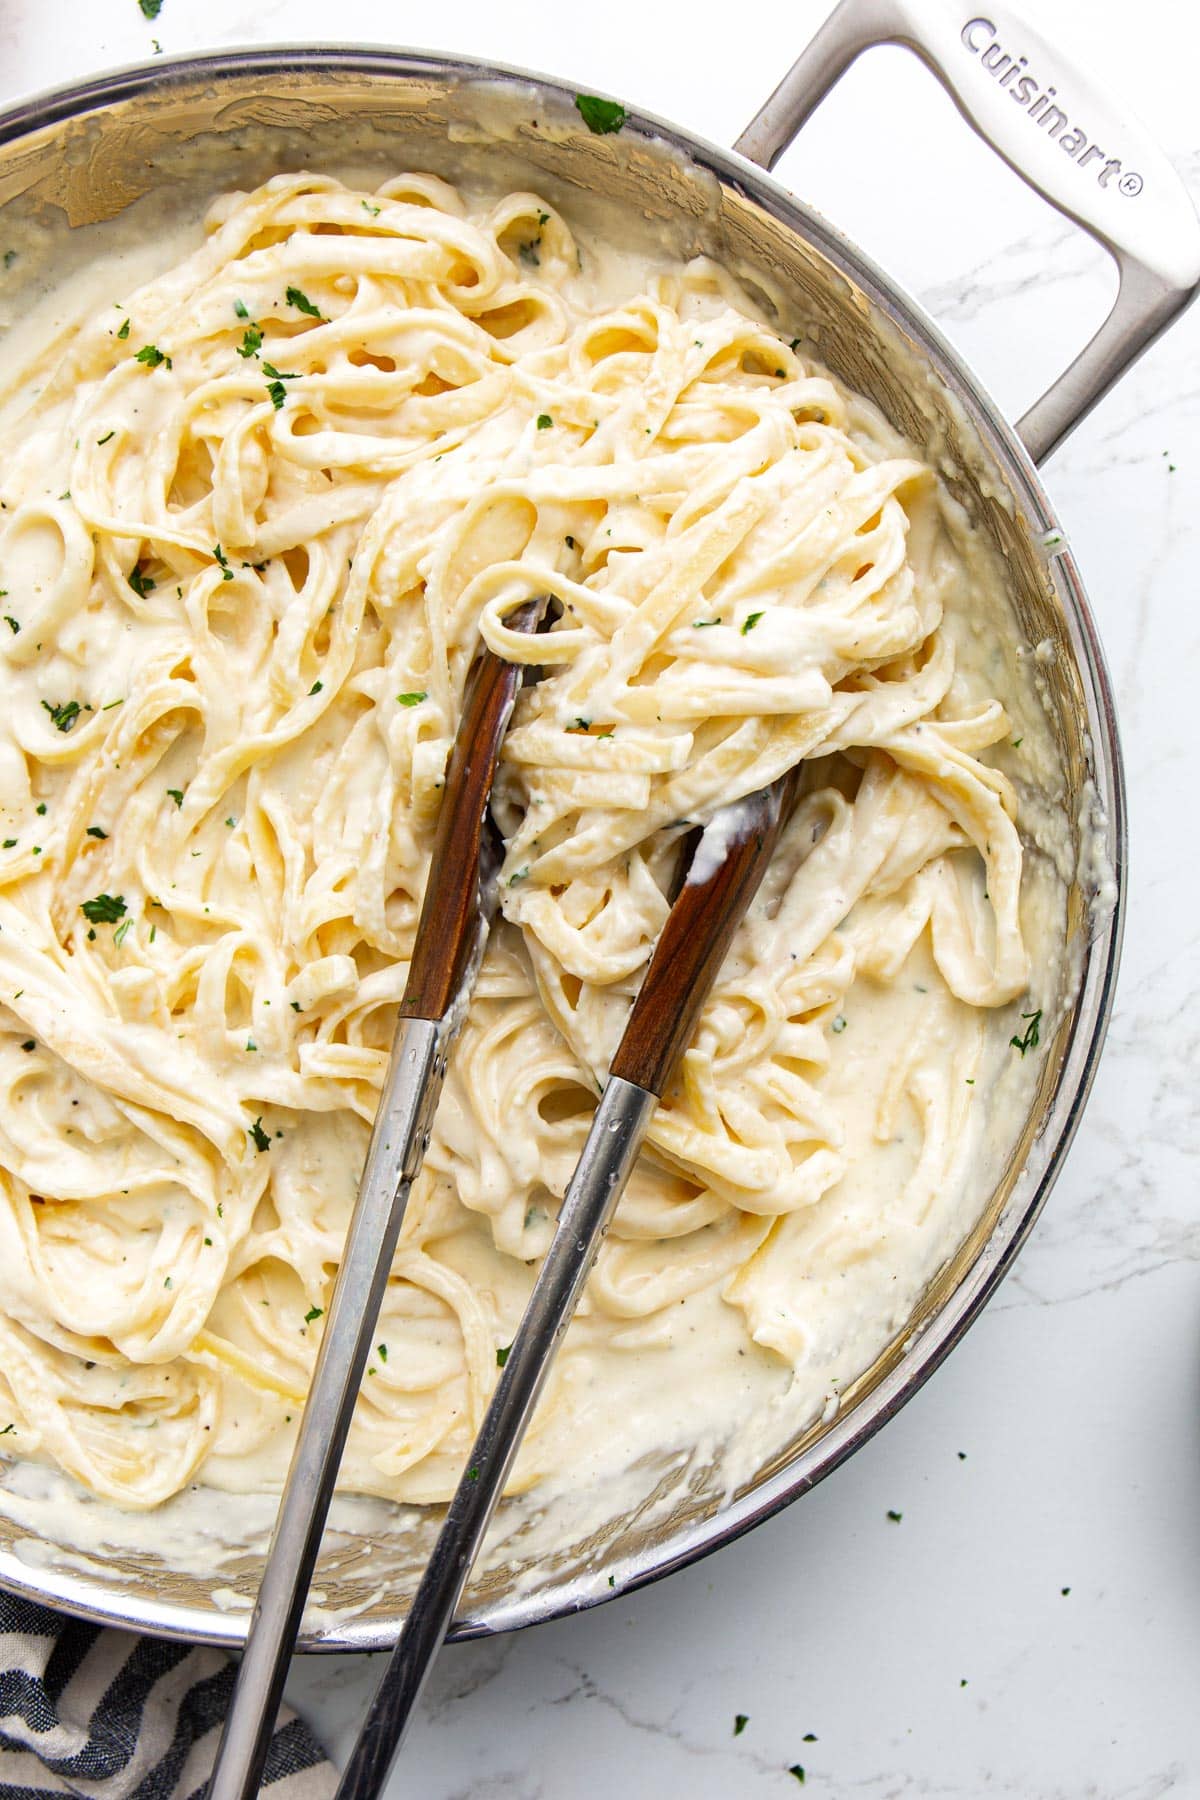 Fettucine pasta smothered in homemade Alfredo sauce in a stainless steel skillet.